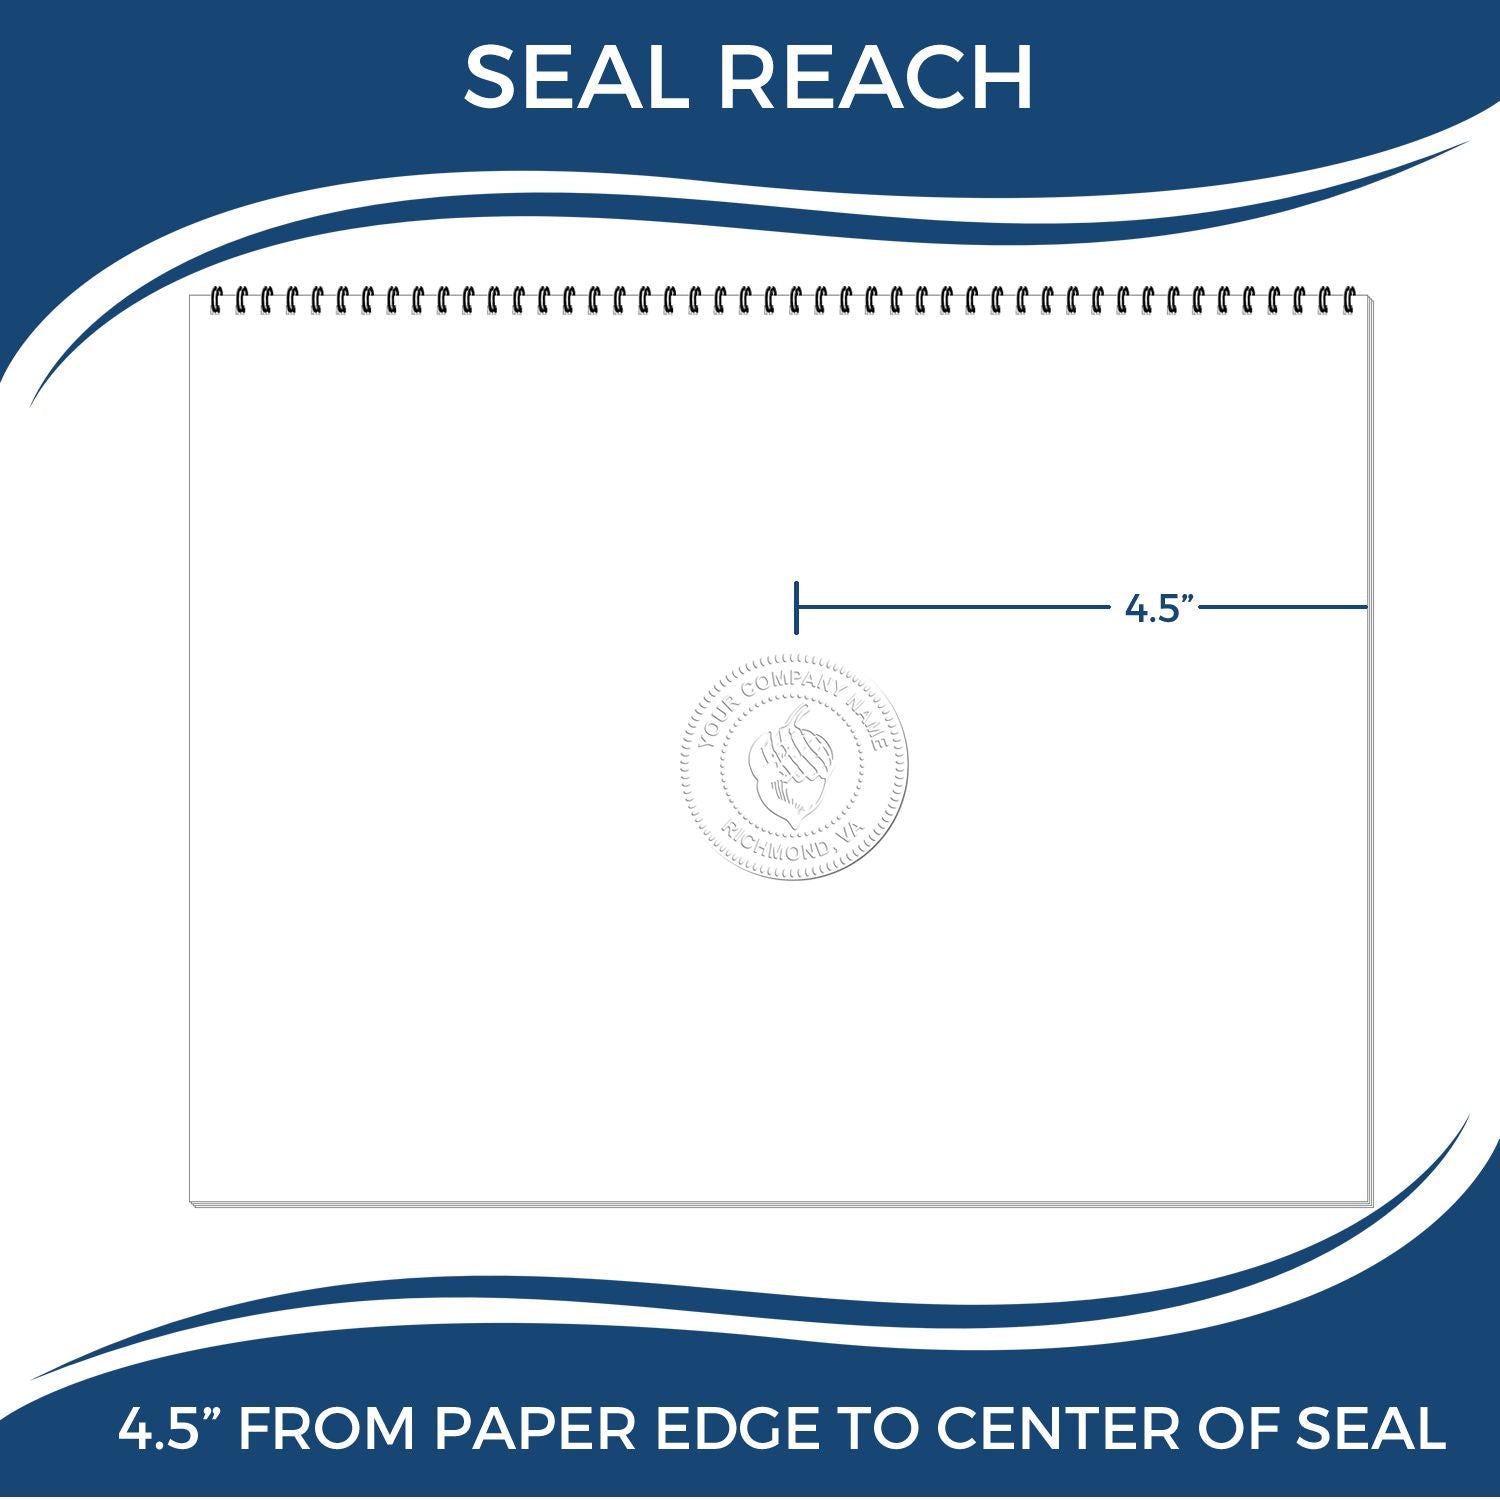 An infographic showing the seal reach which is represented by a ruler and a miniature seal image of the State of New York Extended Long Reach Engineer Seal